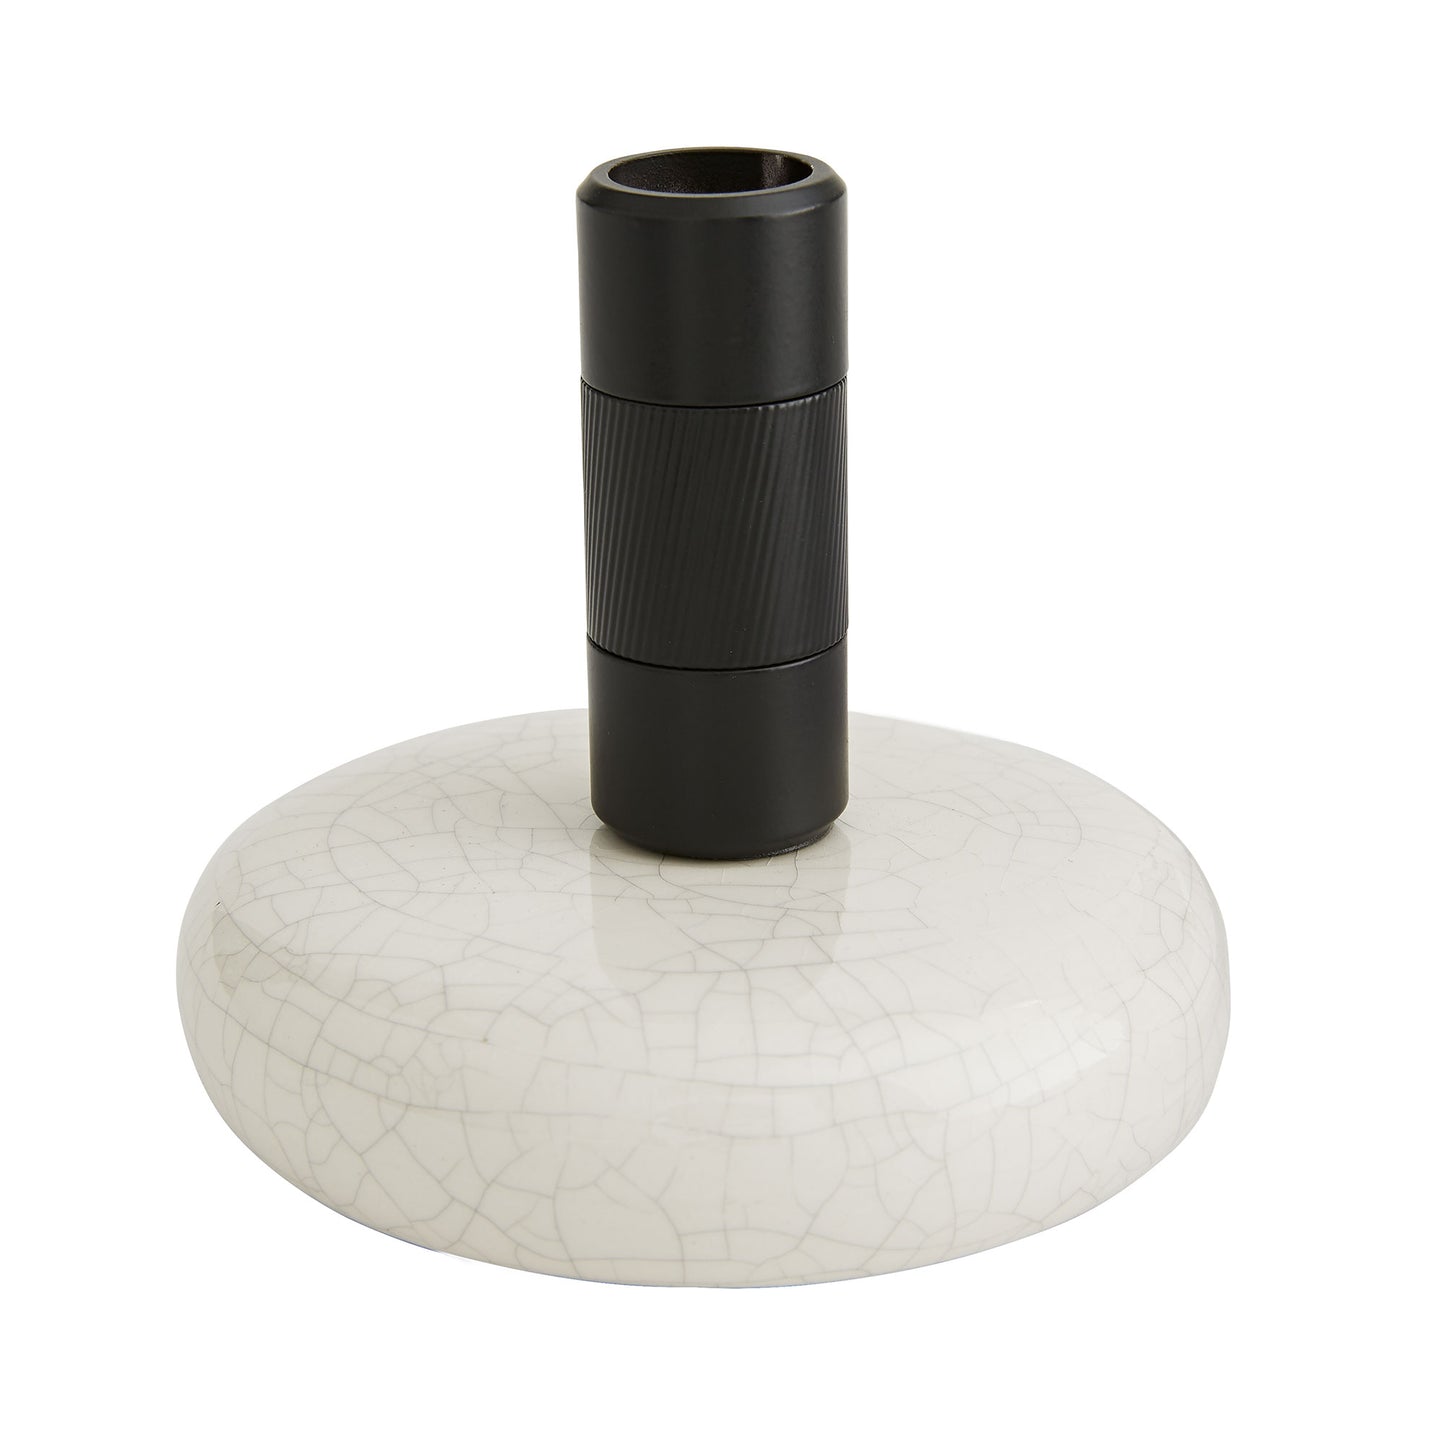 Set of 3 Glaze Candlesticks: Modern Blackened Steel Holders with Ivory Stained Crackle Ceramic Disc Bases